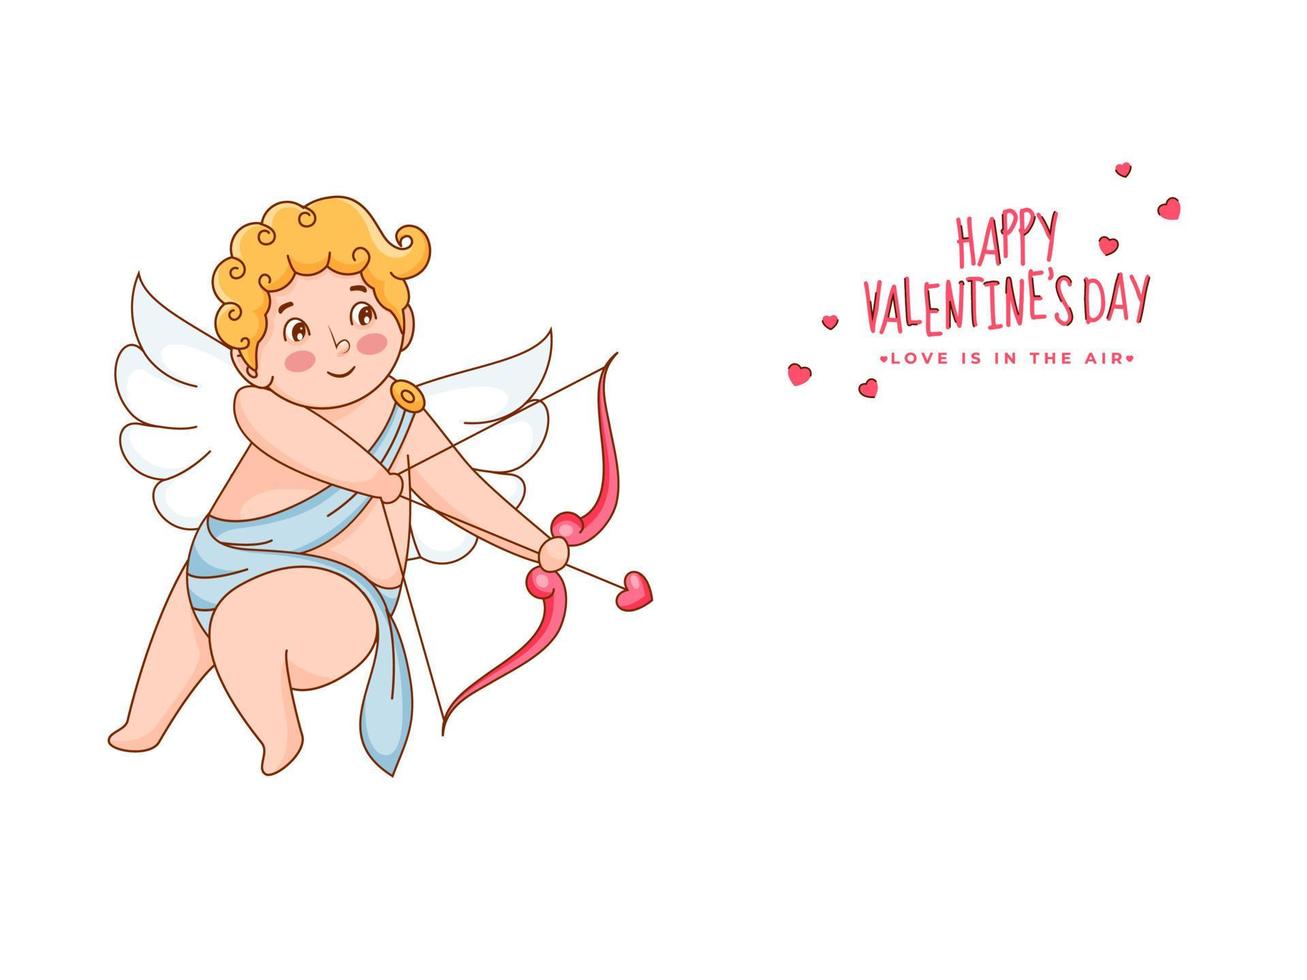 Cartoon Angel Cupid with Arrow on White Background for Happy Valentine's Day, Love is in the air concept. vector